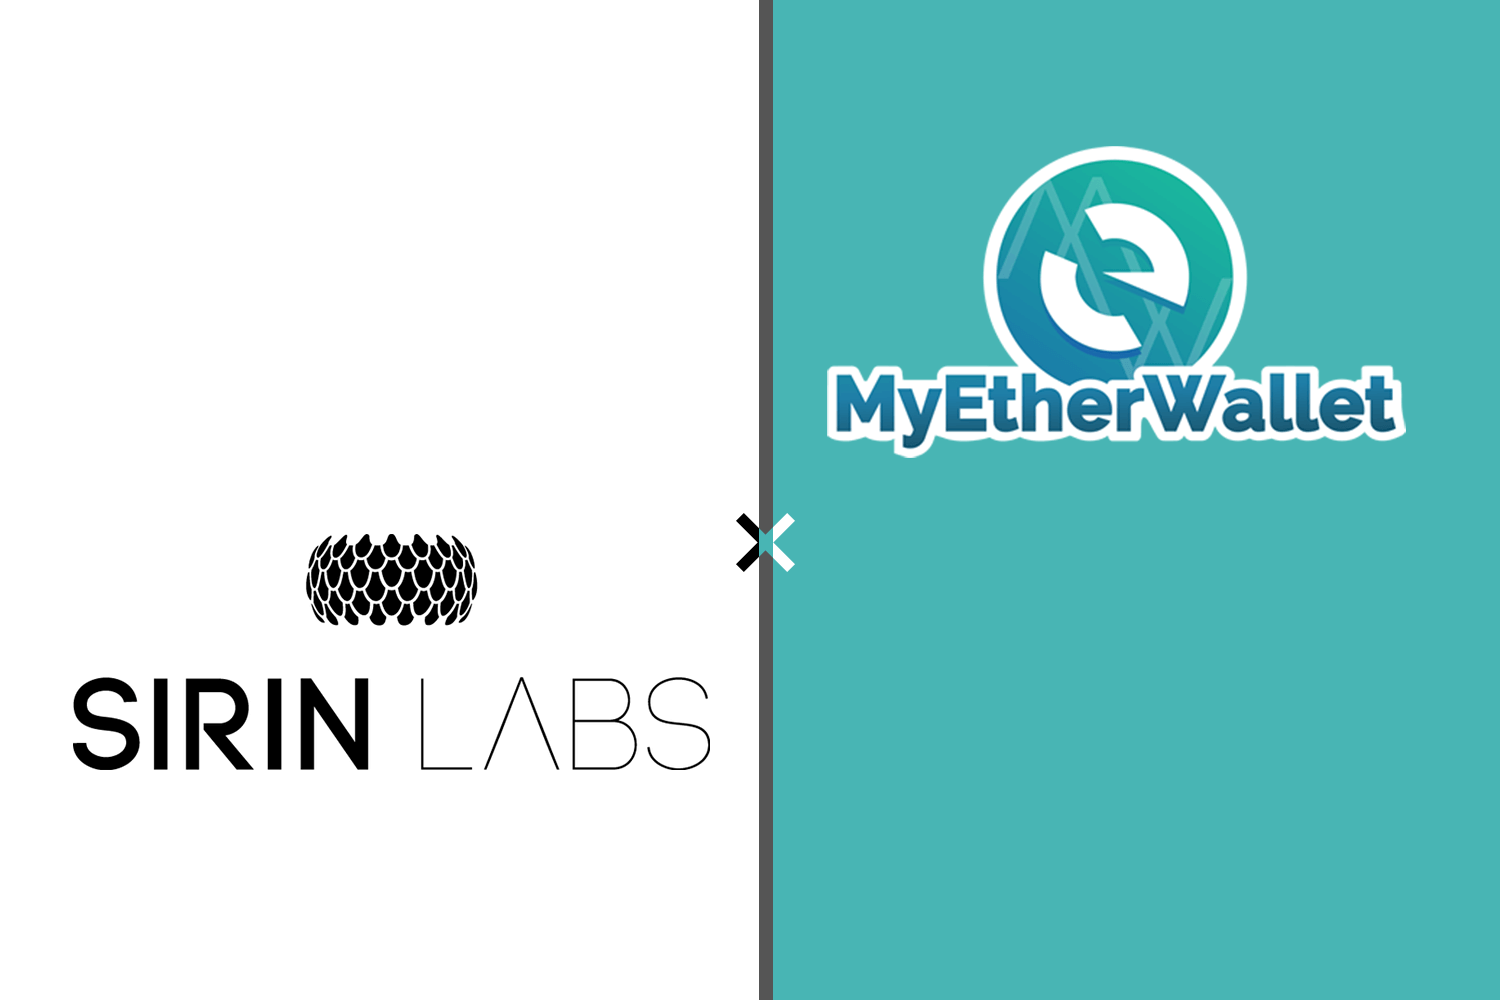 sirin labs ans myetherwallet partners to increase outreach of blockchain smartphones